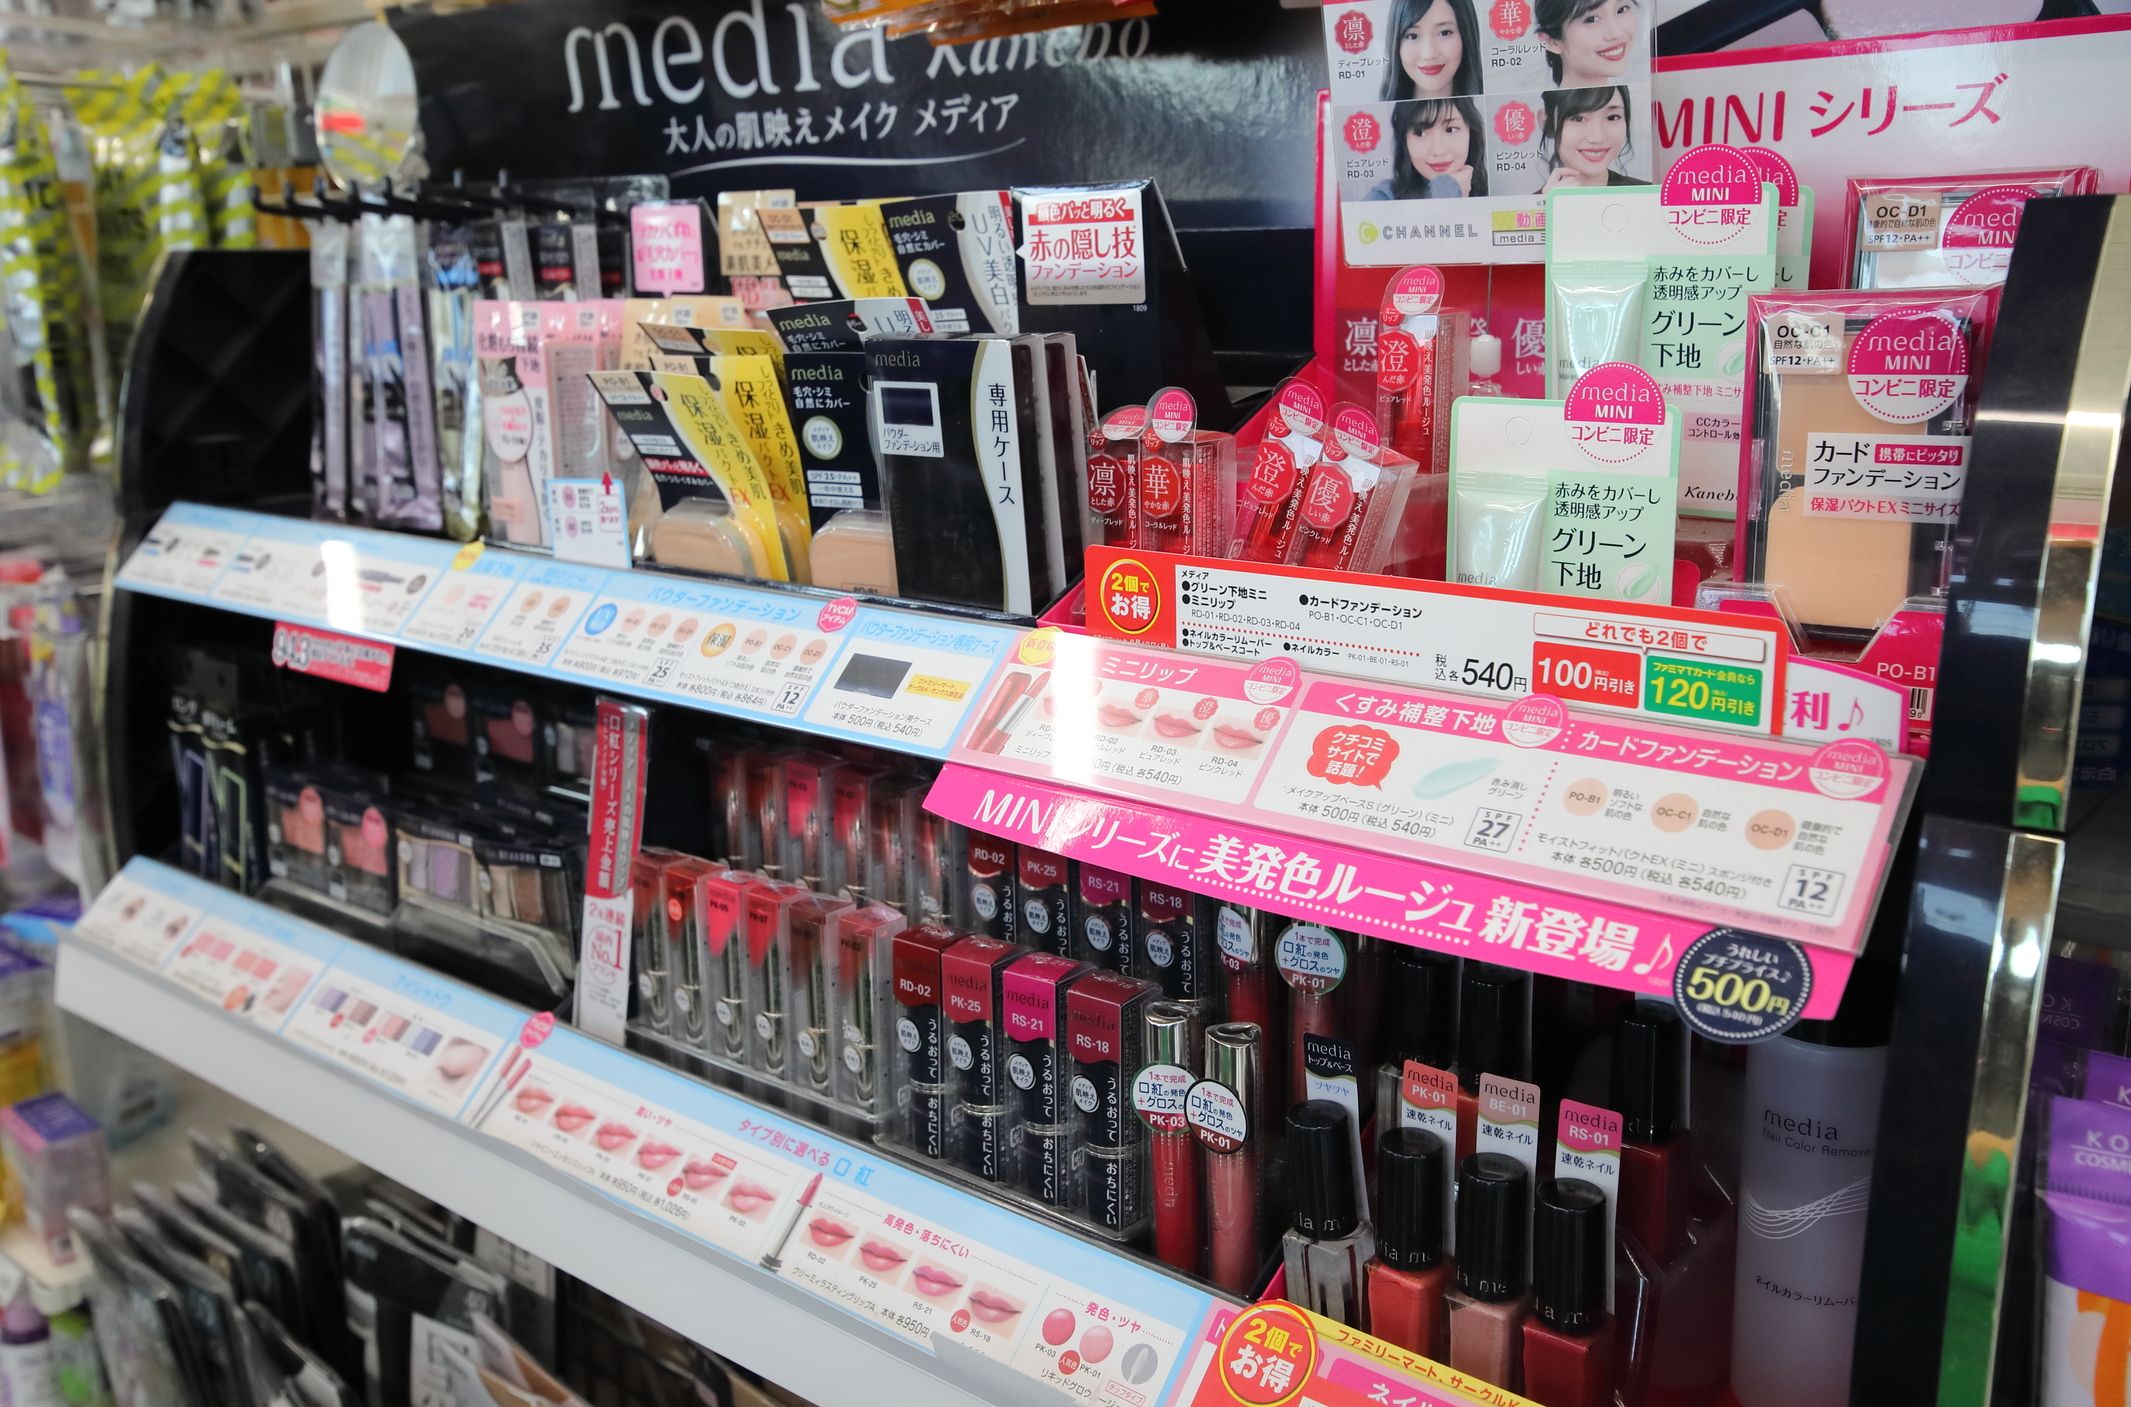 A shelf filled with Japanese cosmetics